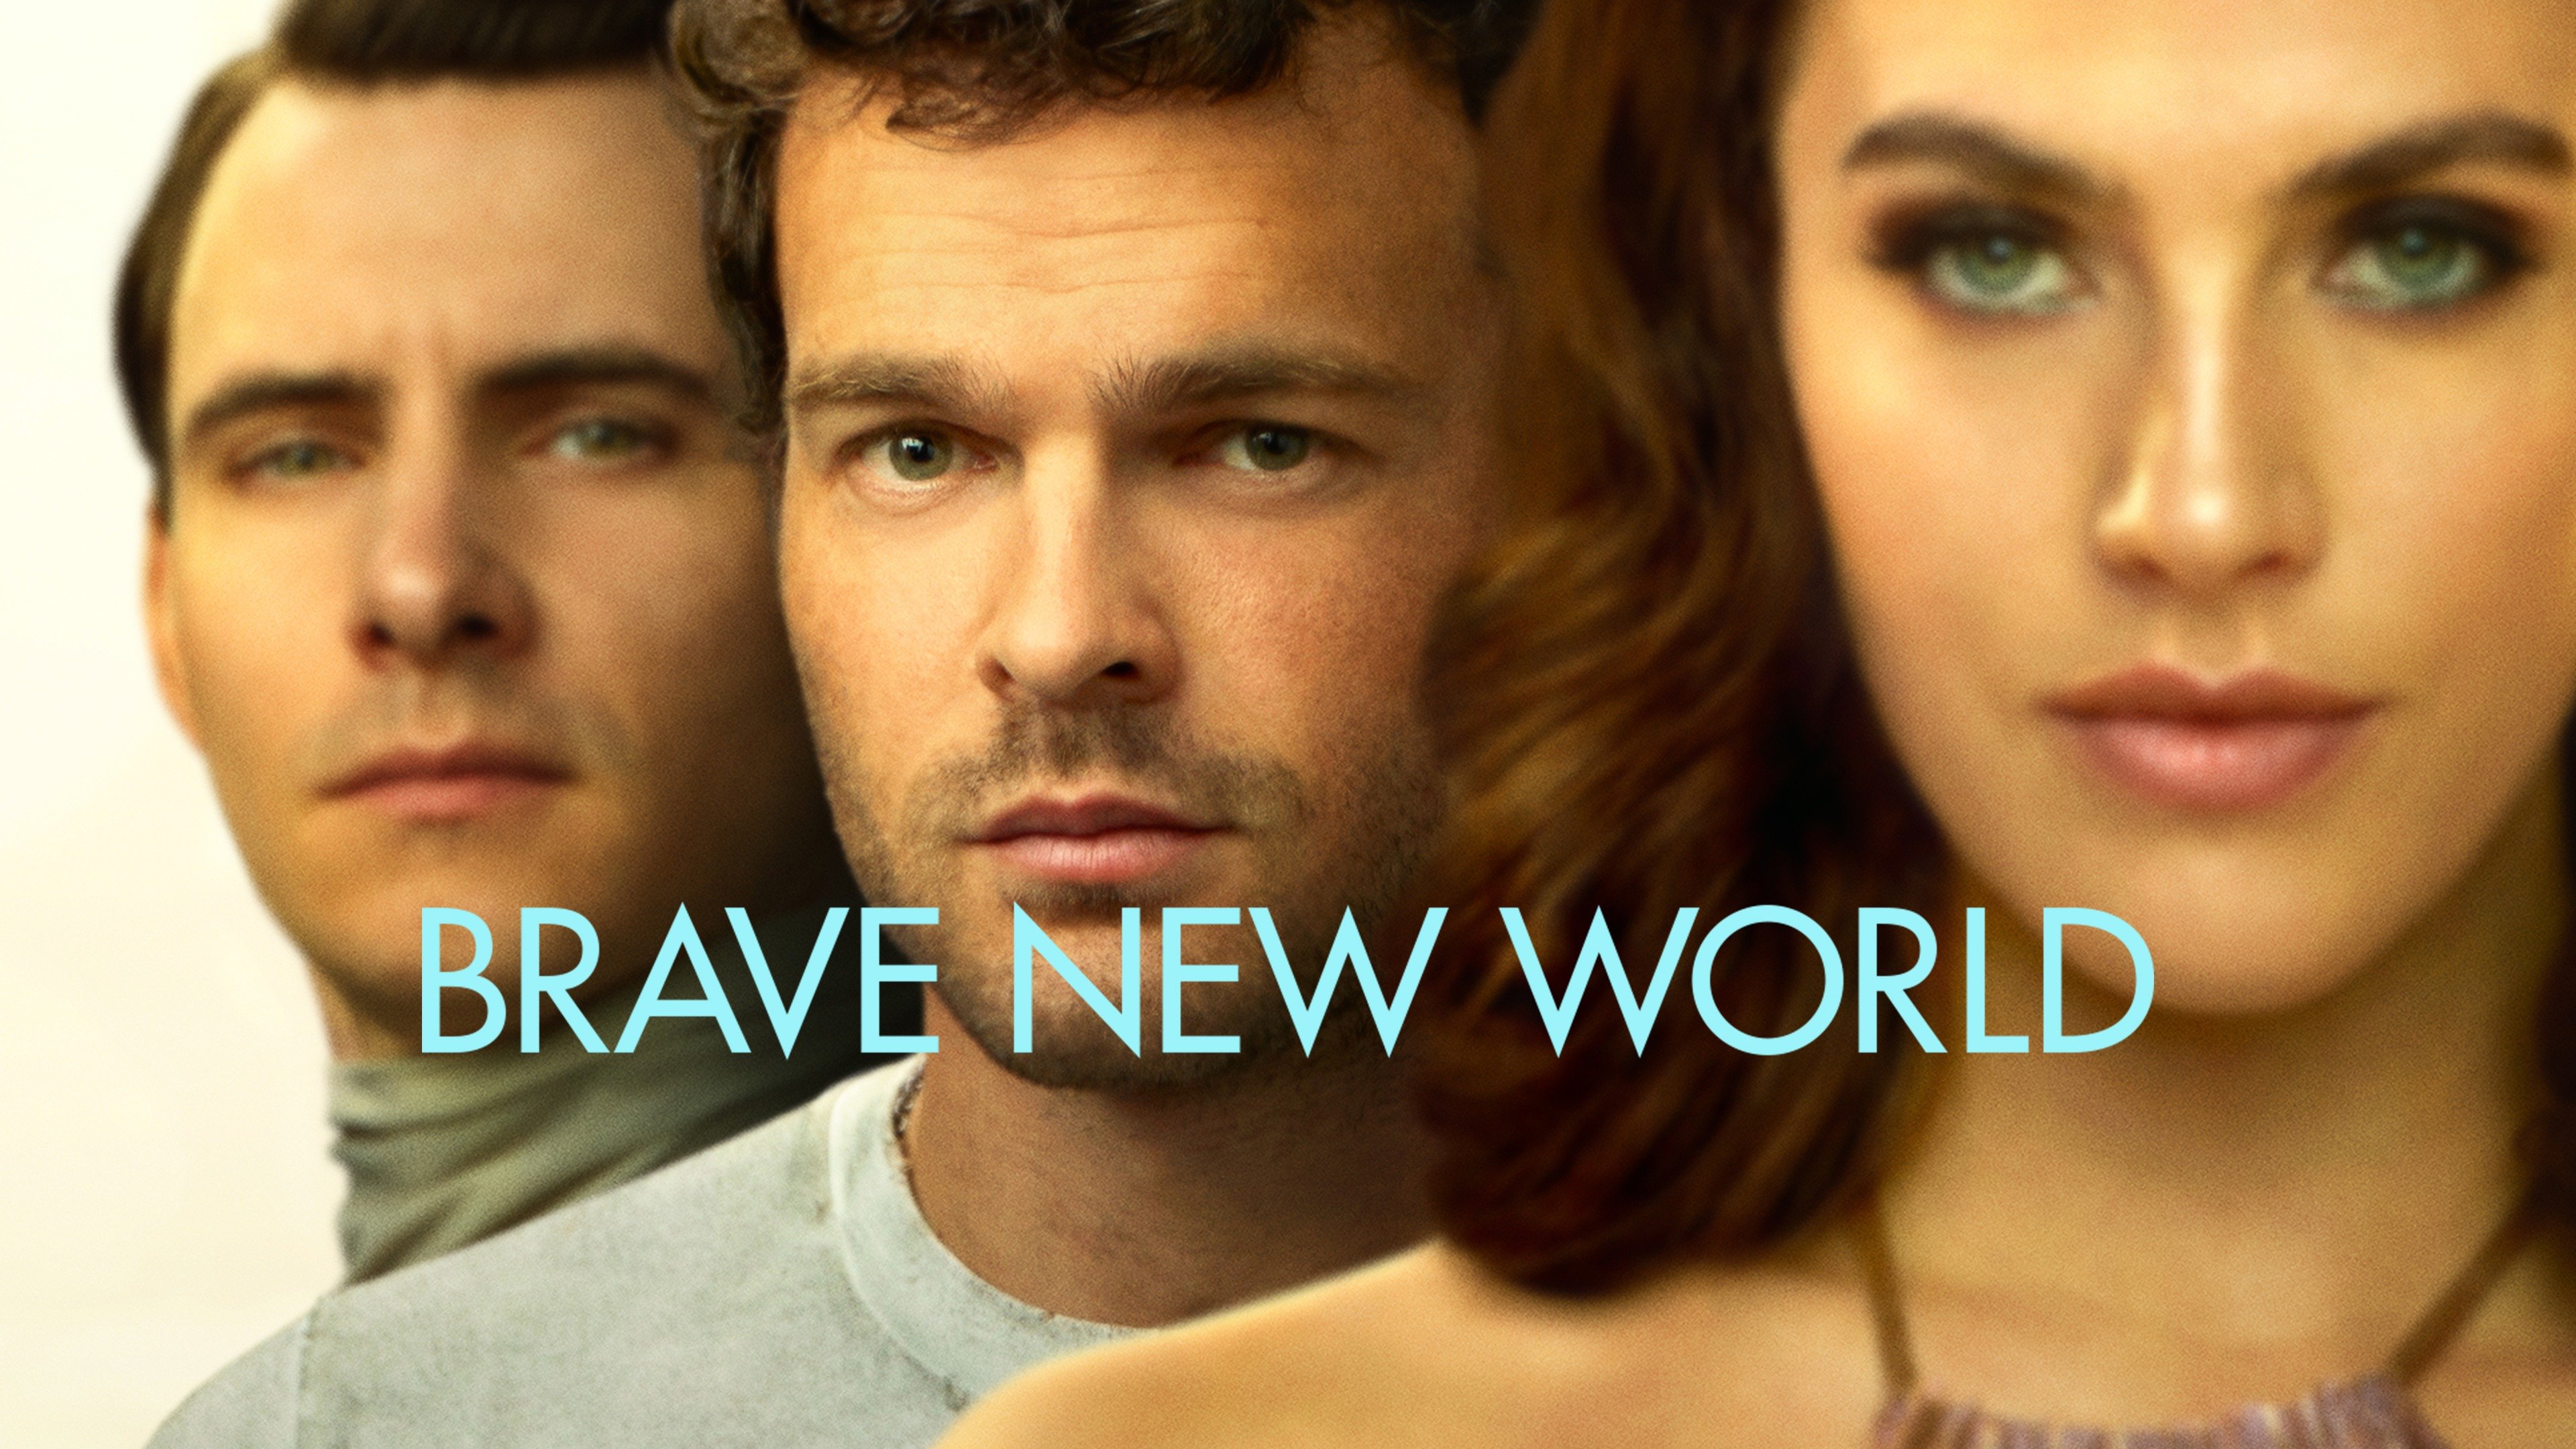 Brave New World - Peacock Series - Where To Watch